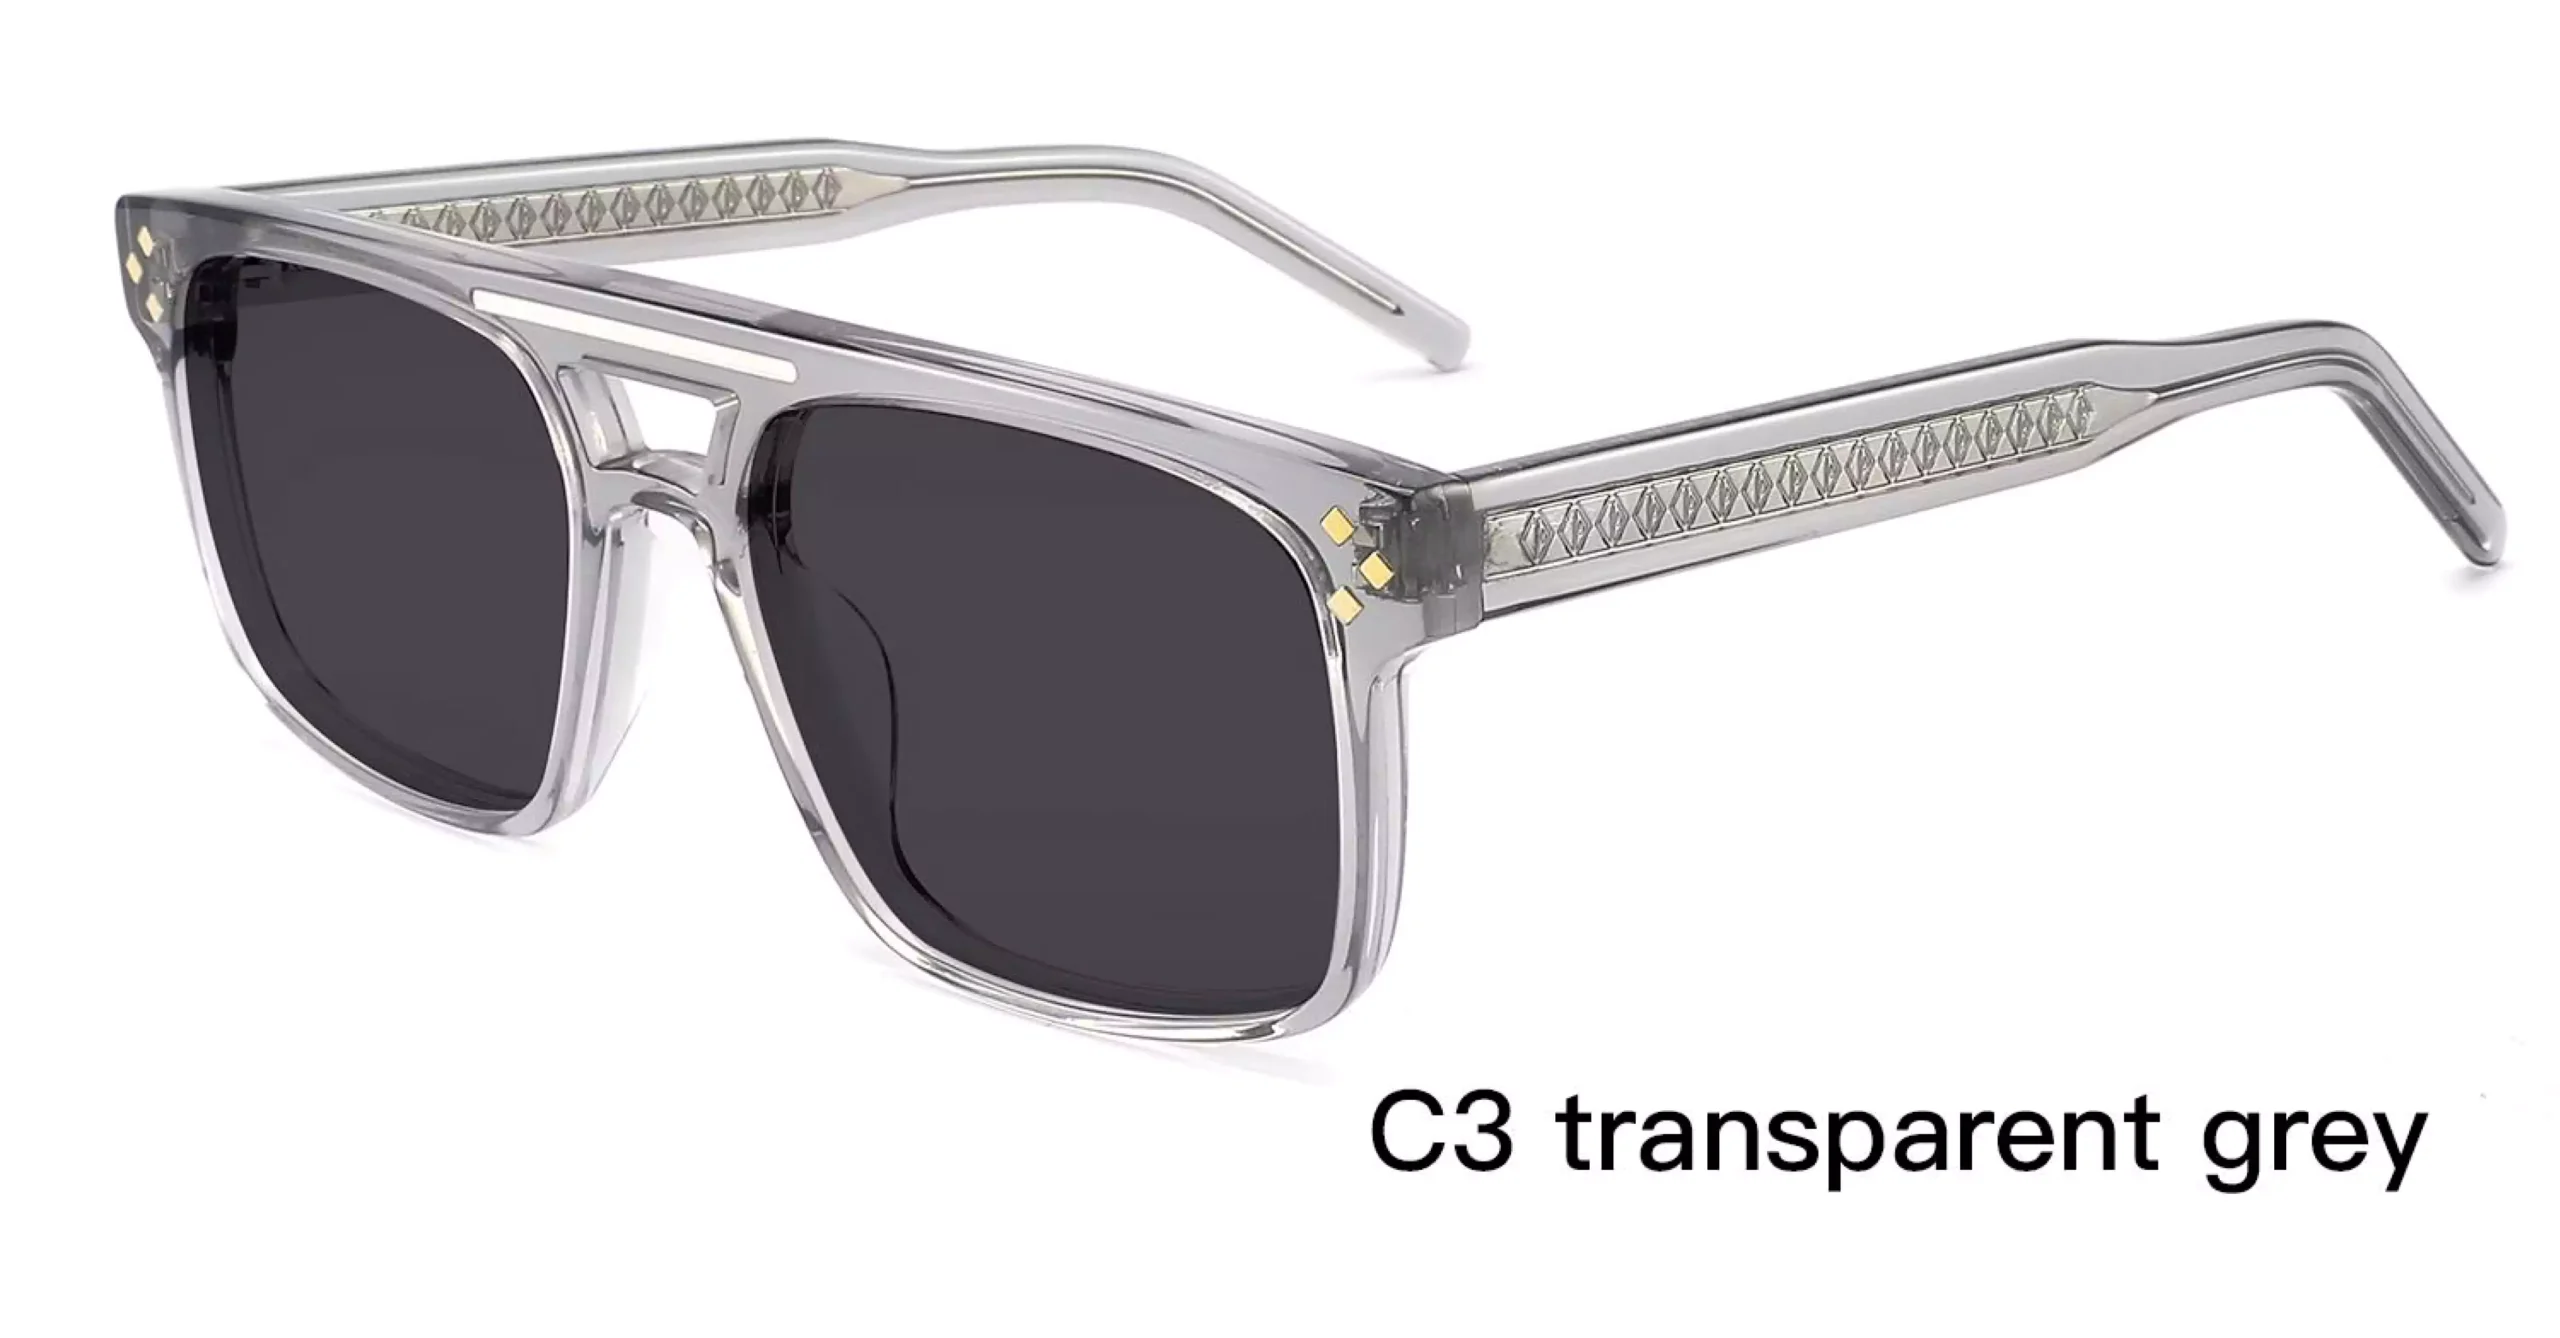 Fashion Sunglasses Wholesale Suppliers,Transparent Grey, rivets, metal inlay, wide temples, laser engraved wire cores, acetate, UV protection